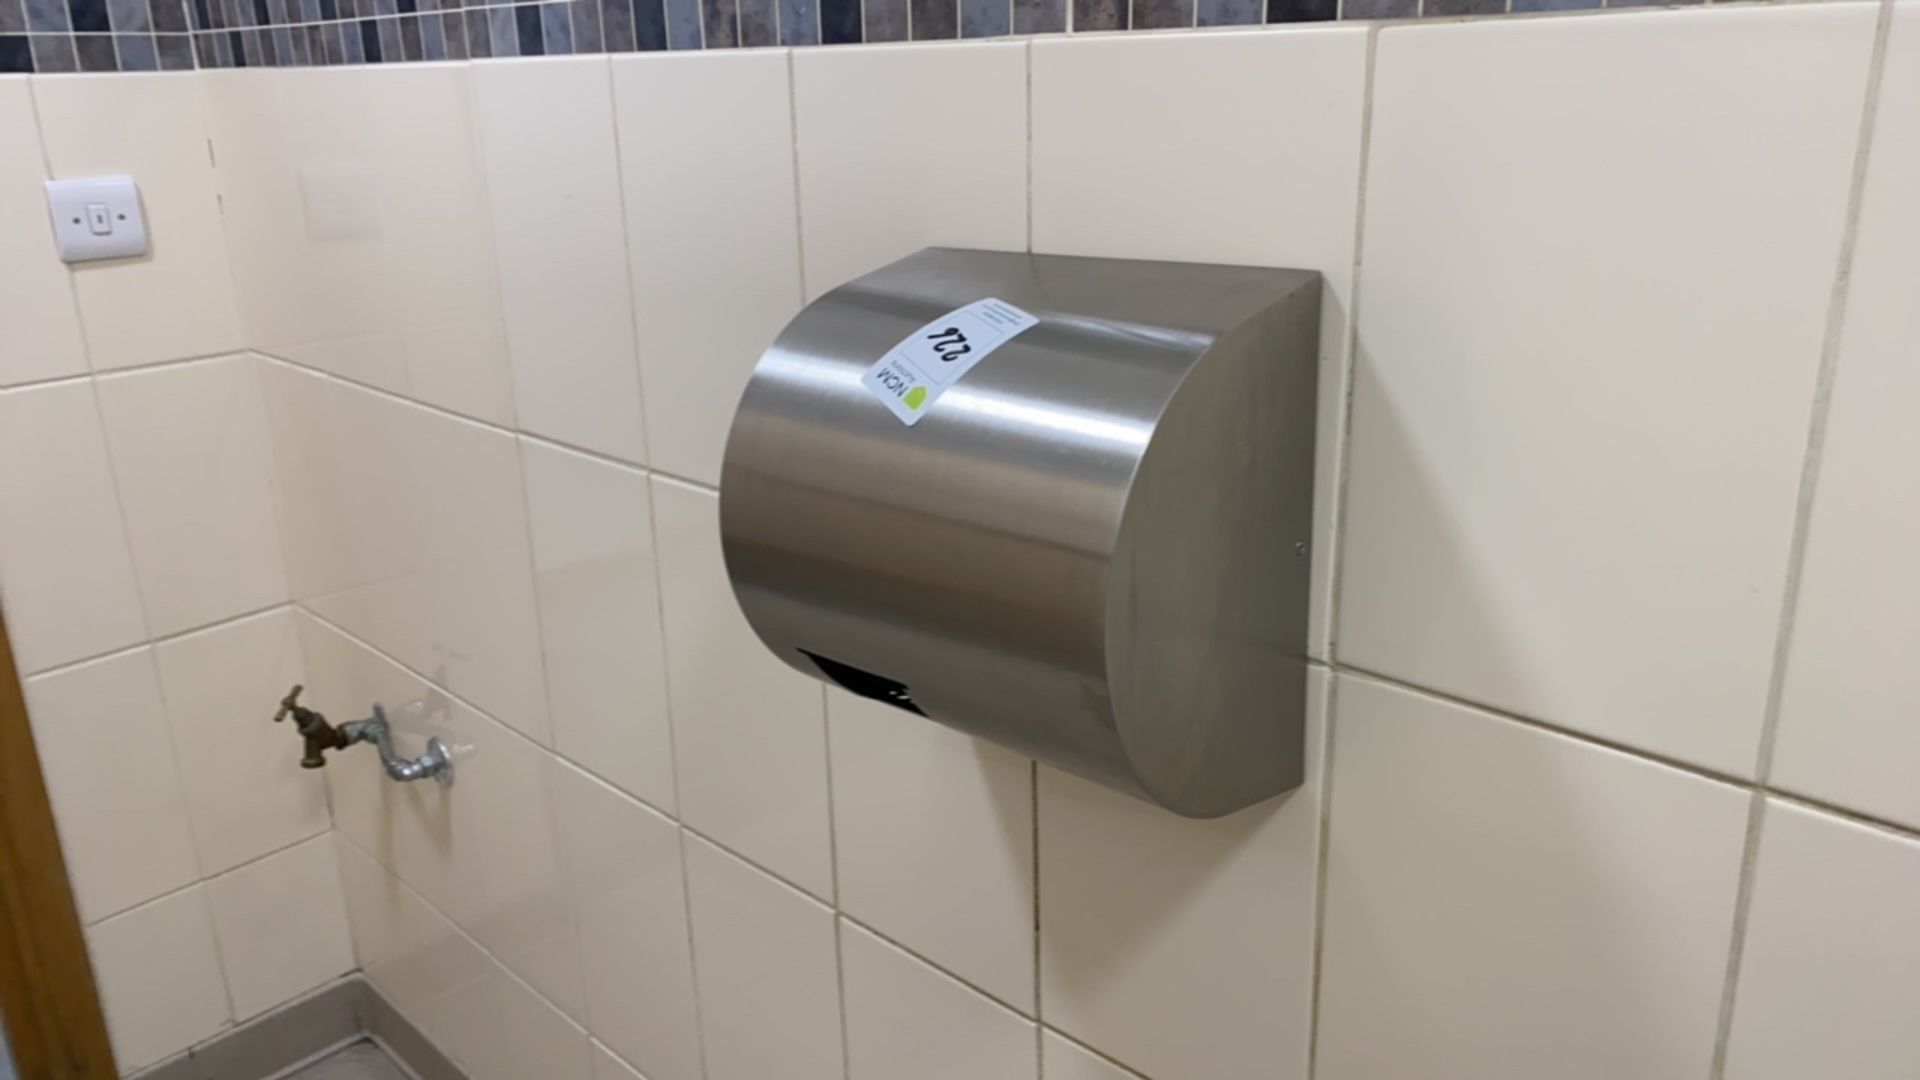 Hand drier - Image 3 of 3